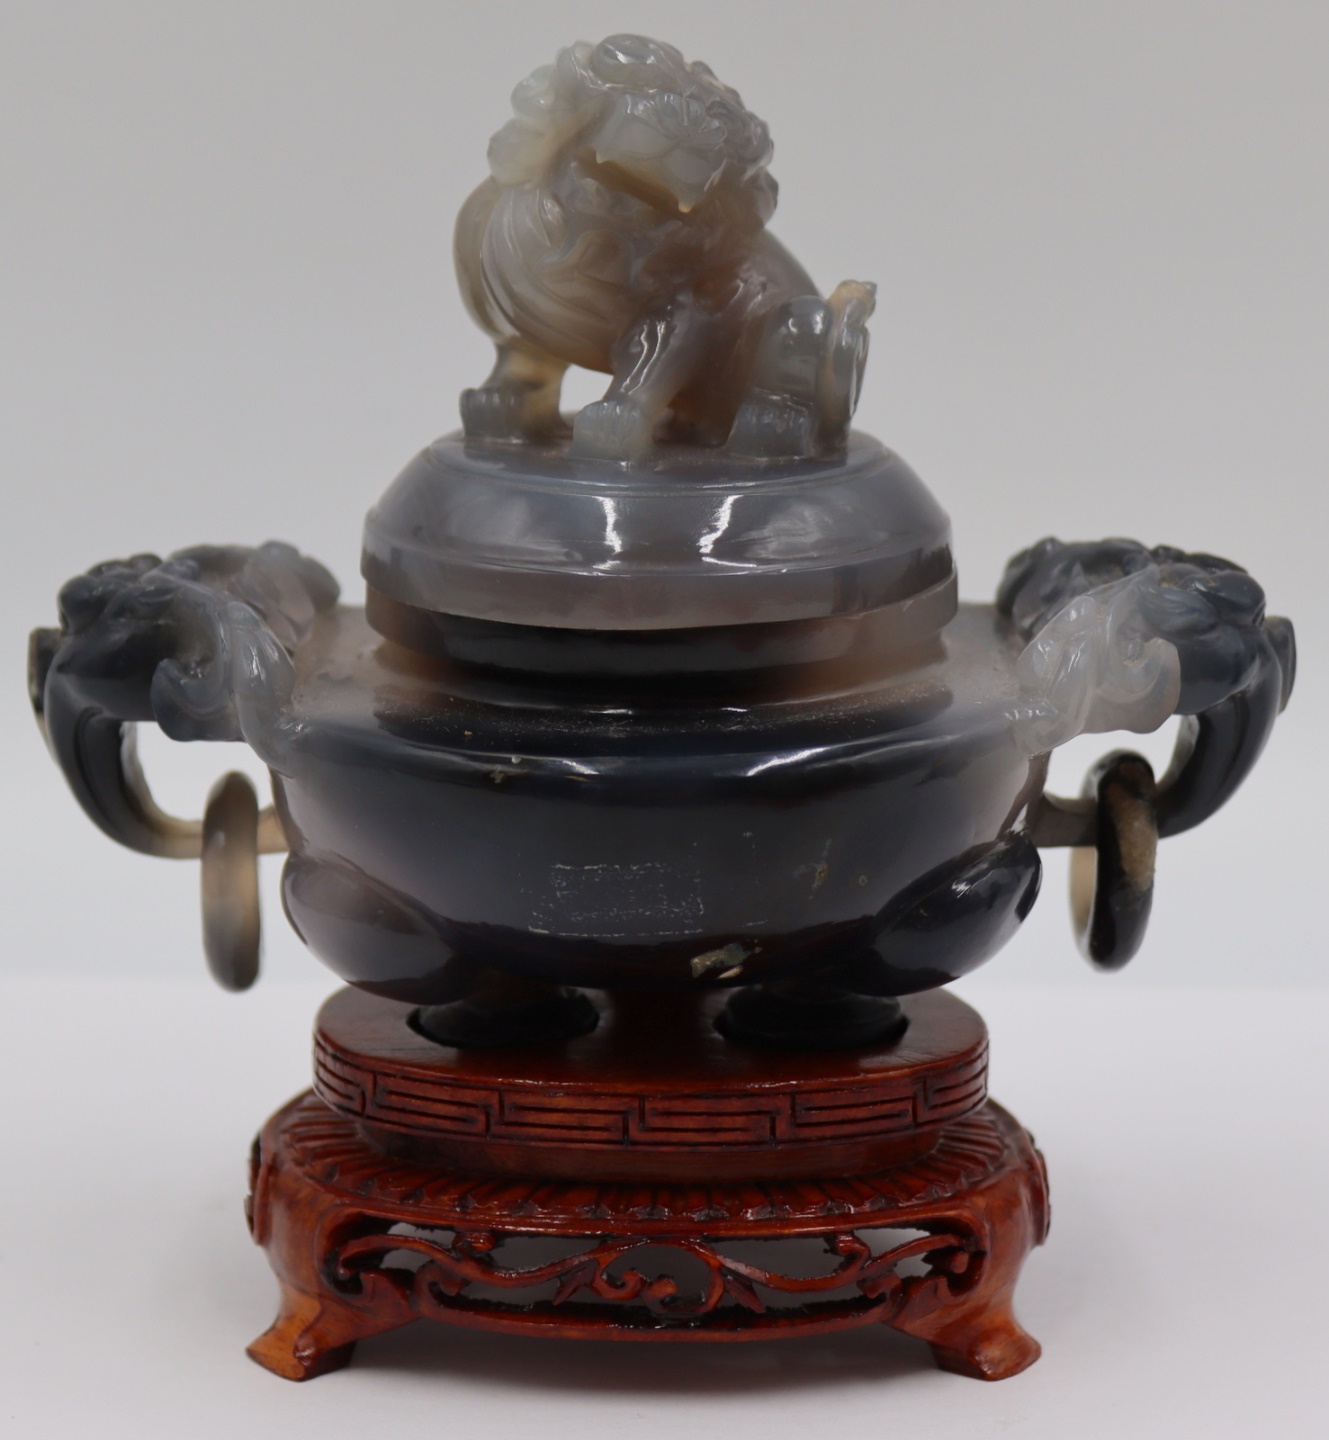 POLISHED STONE CARVING OF A LIDDED